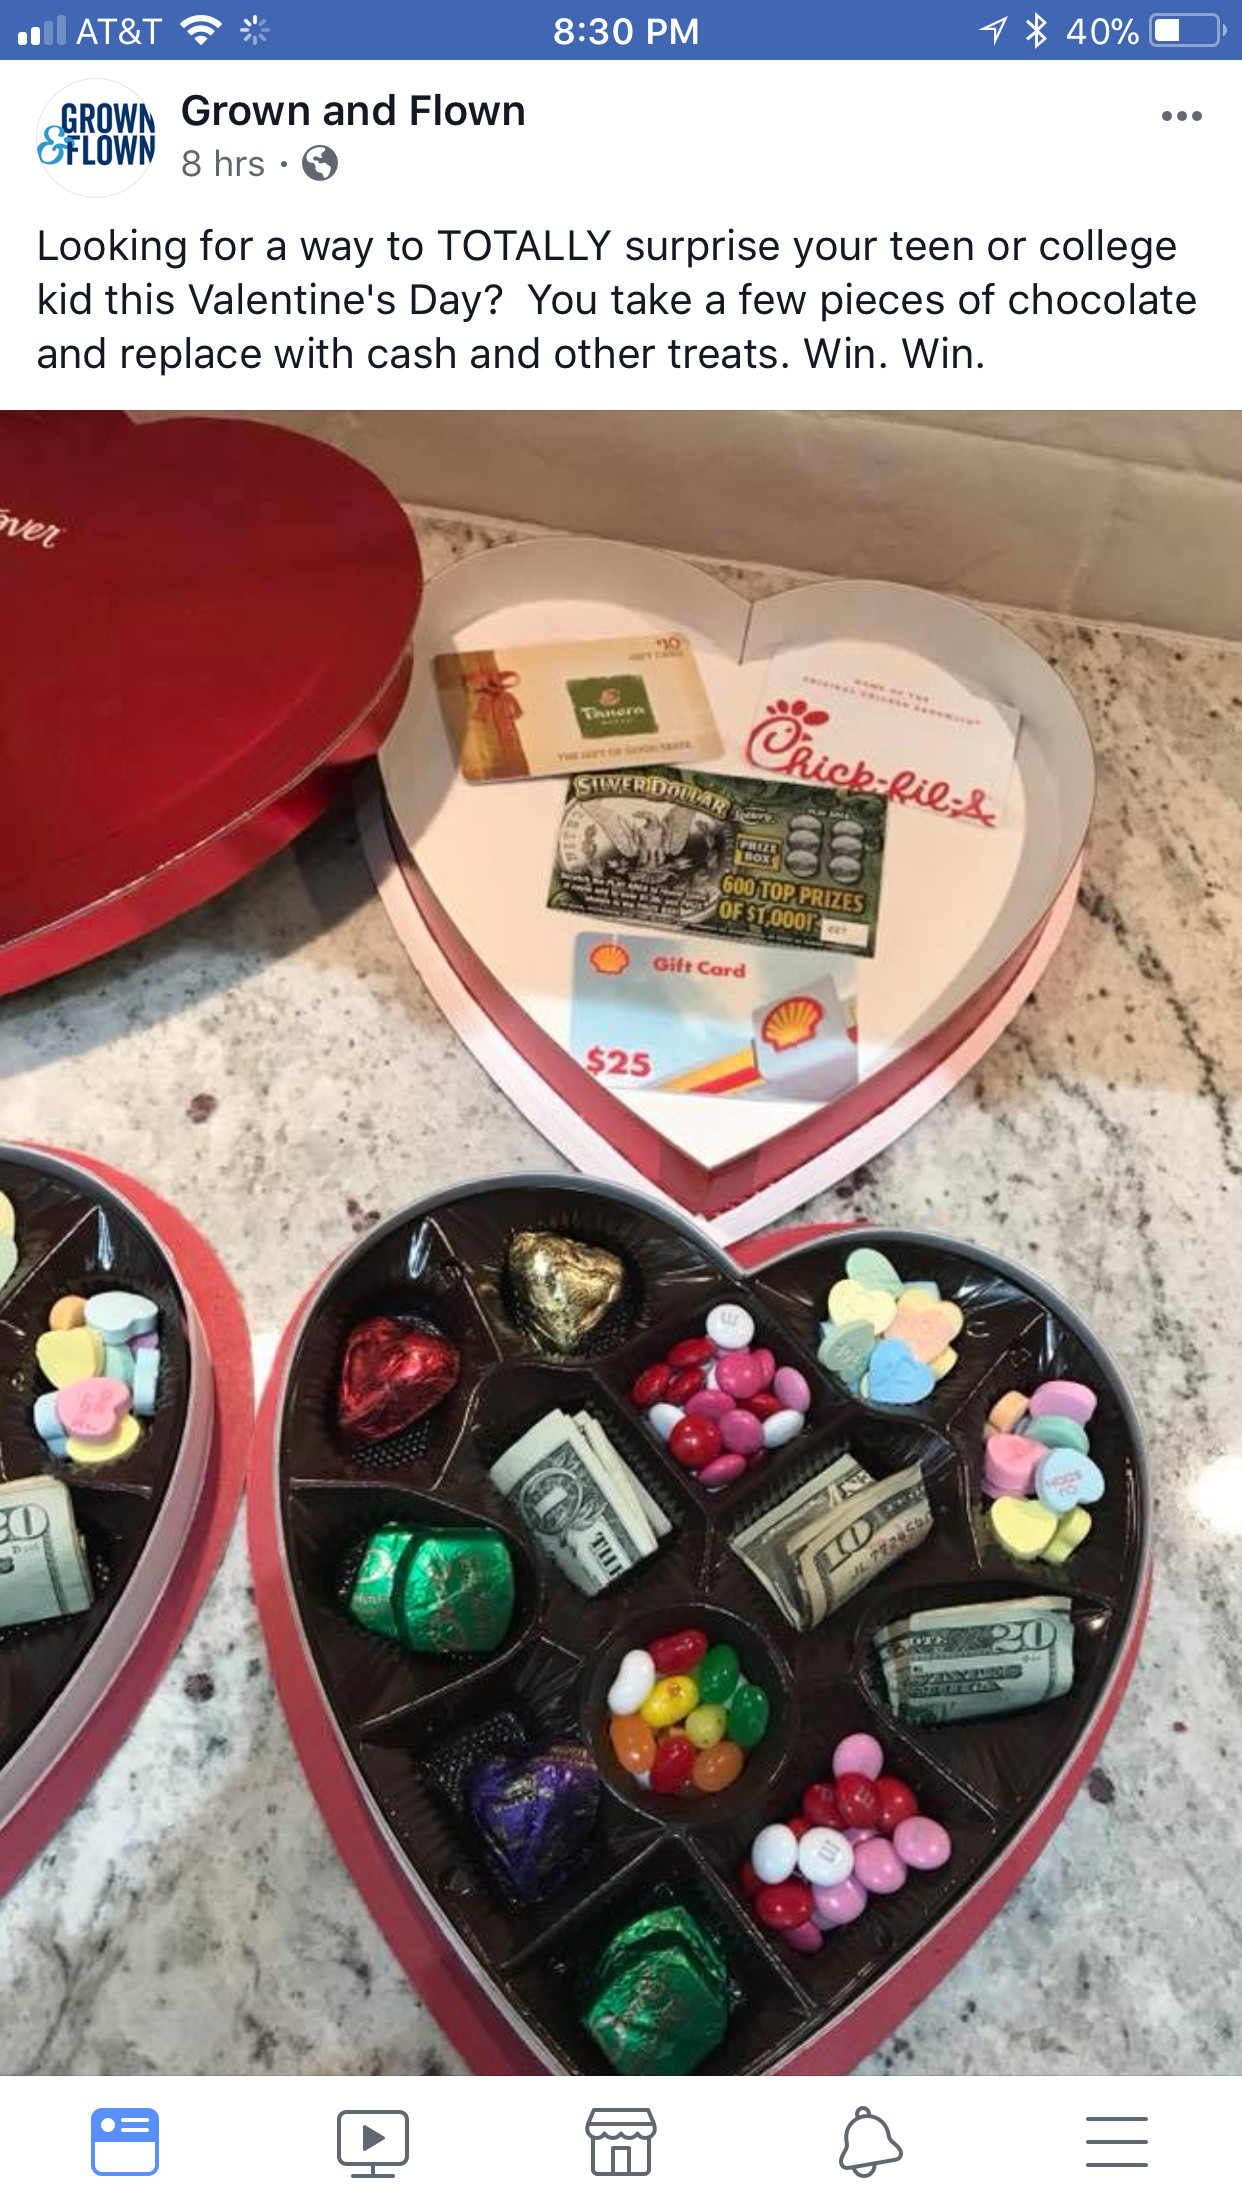 Valentines Gift Ideas For College Students
 Pin on College kids